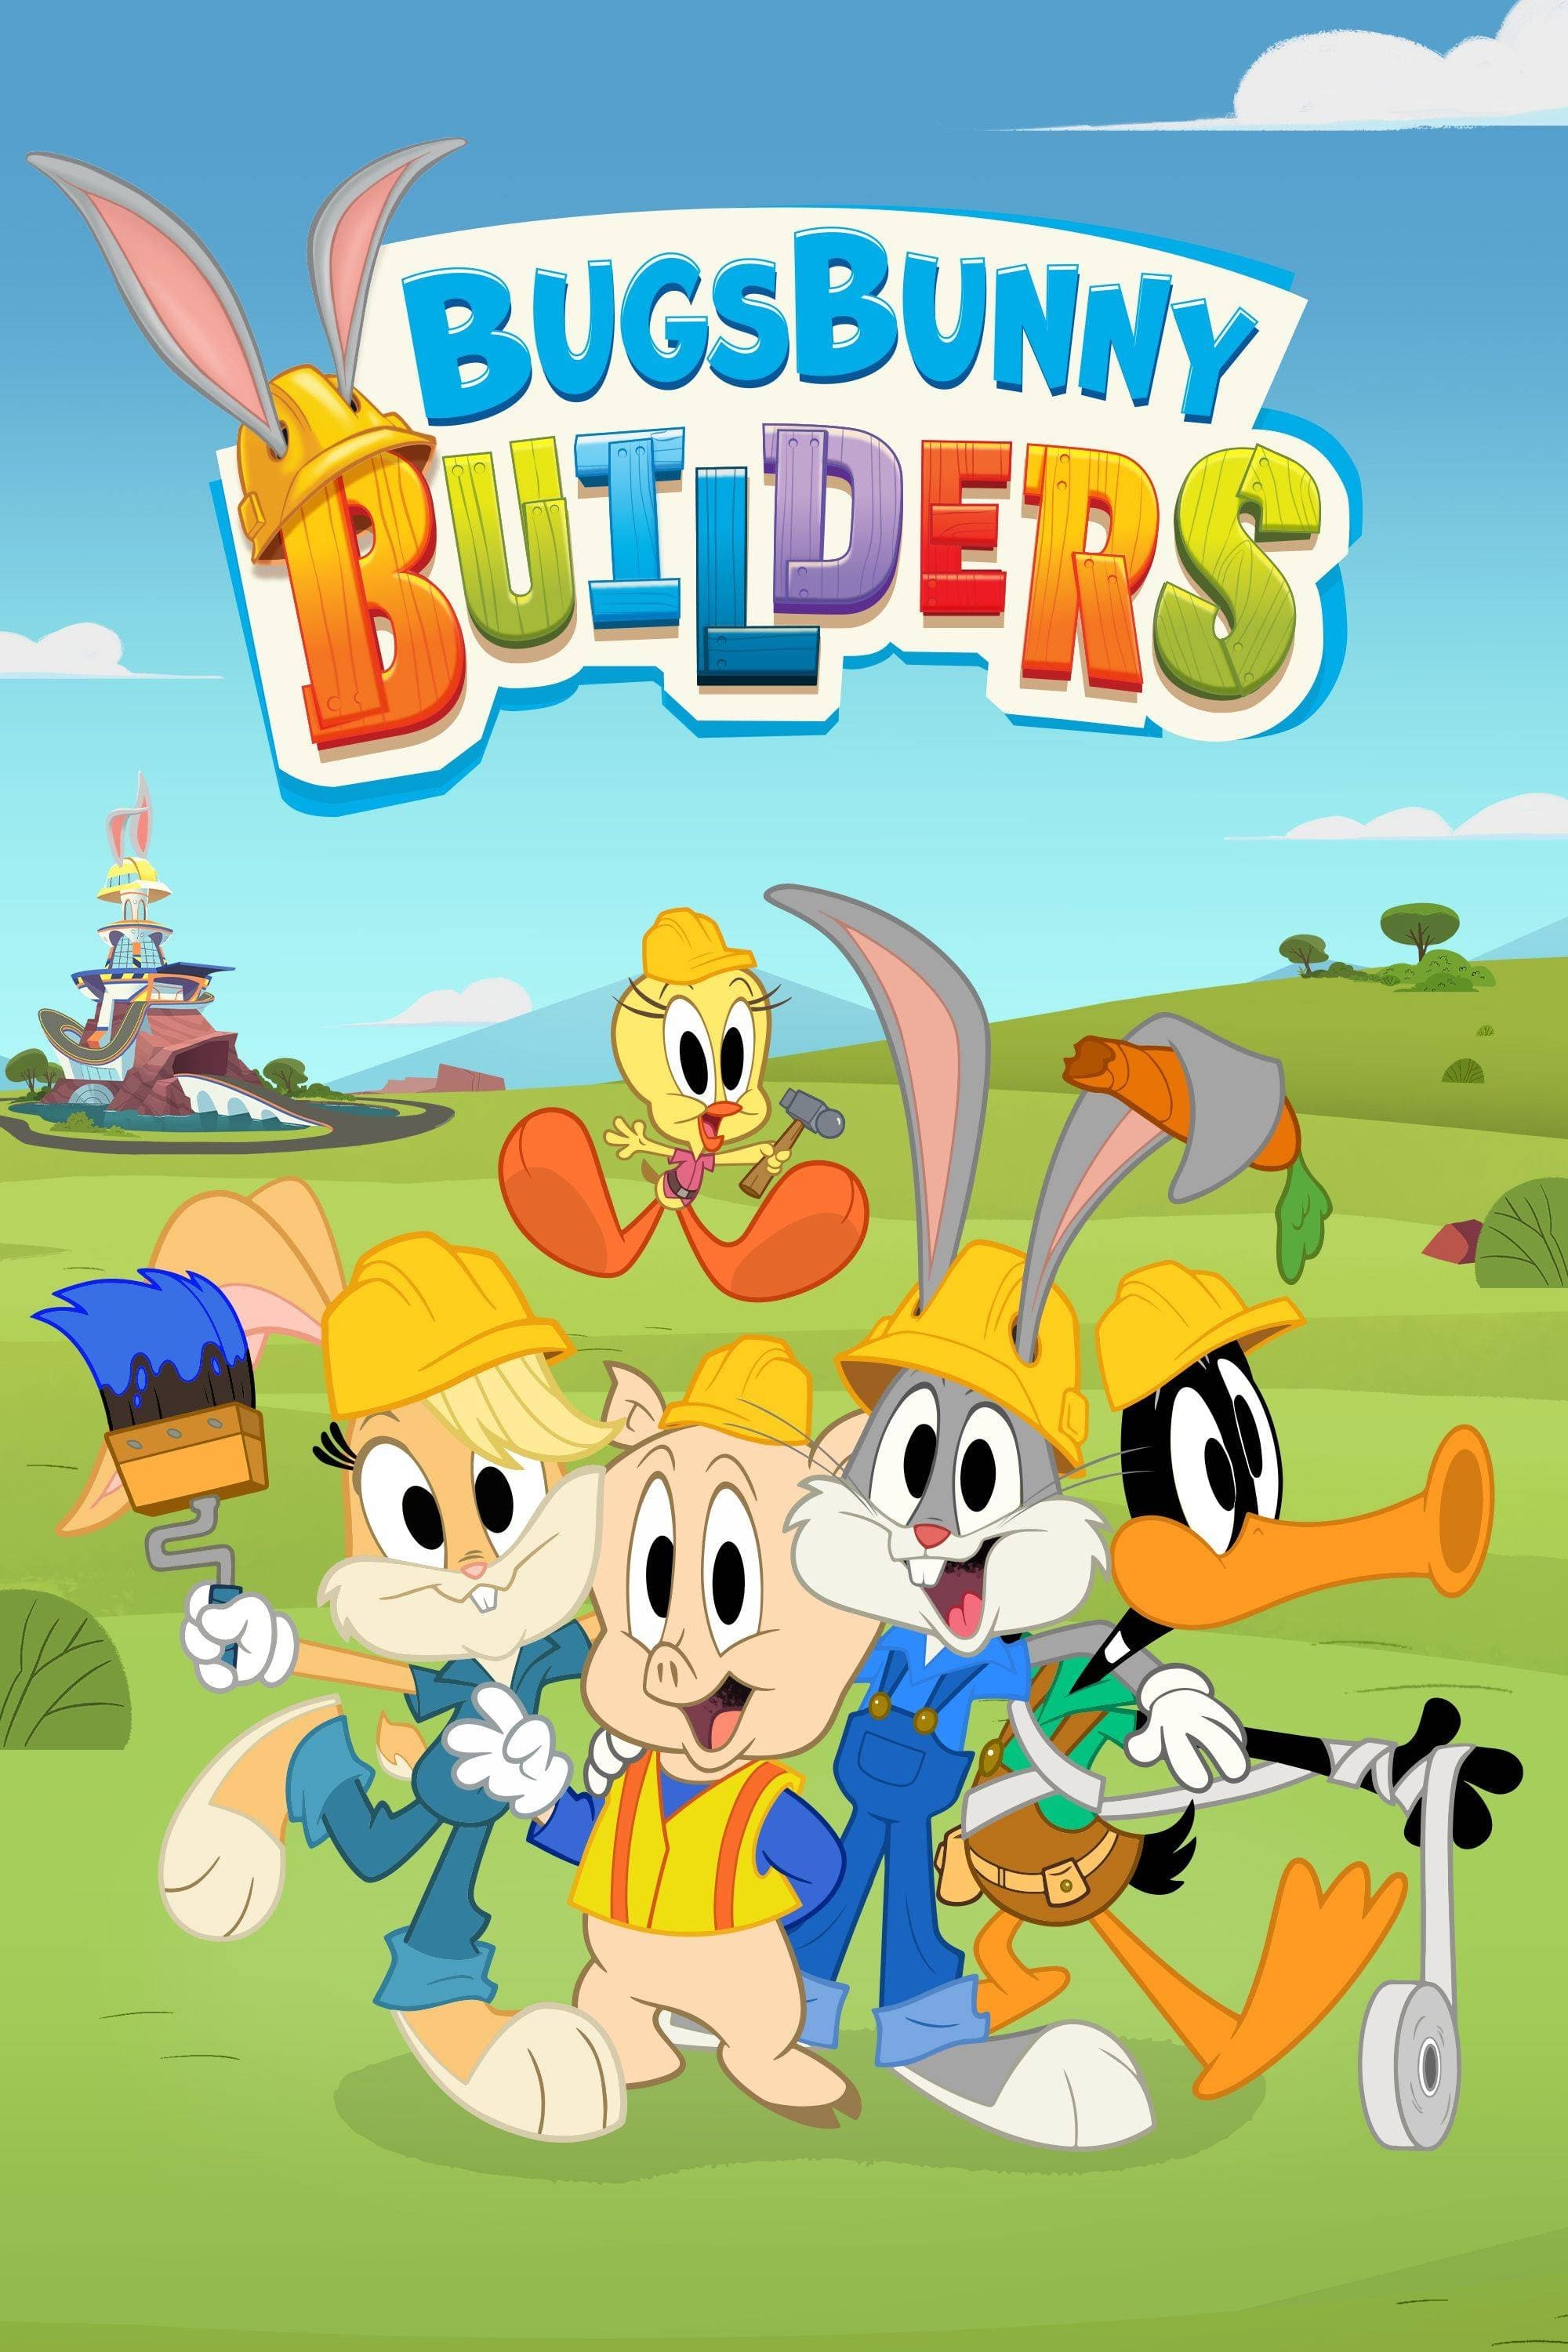 Bugs Bunny Builders TV Shows About Work